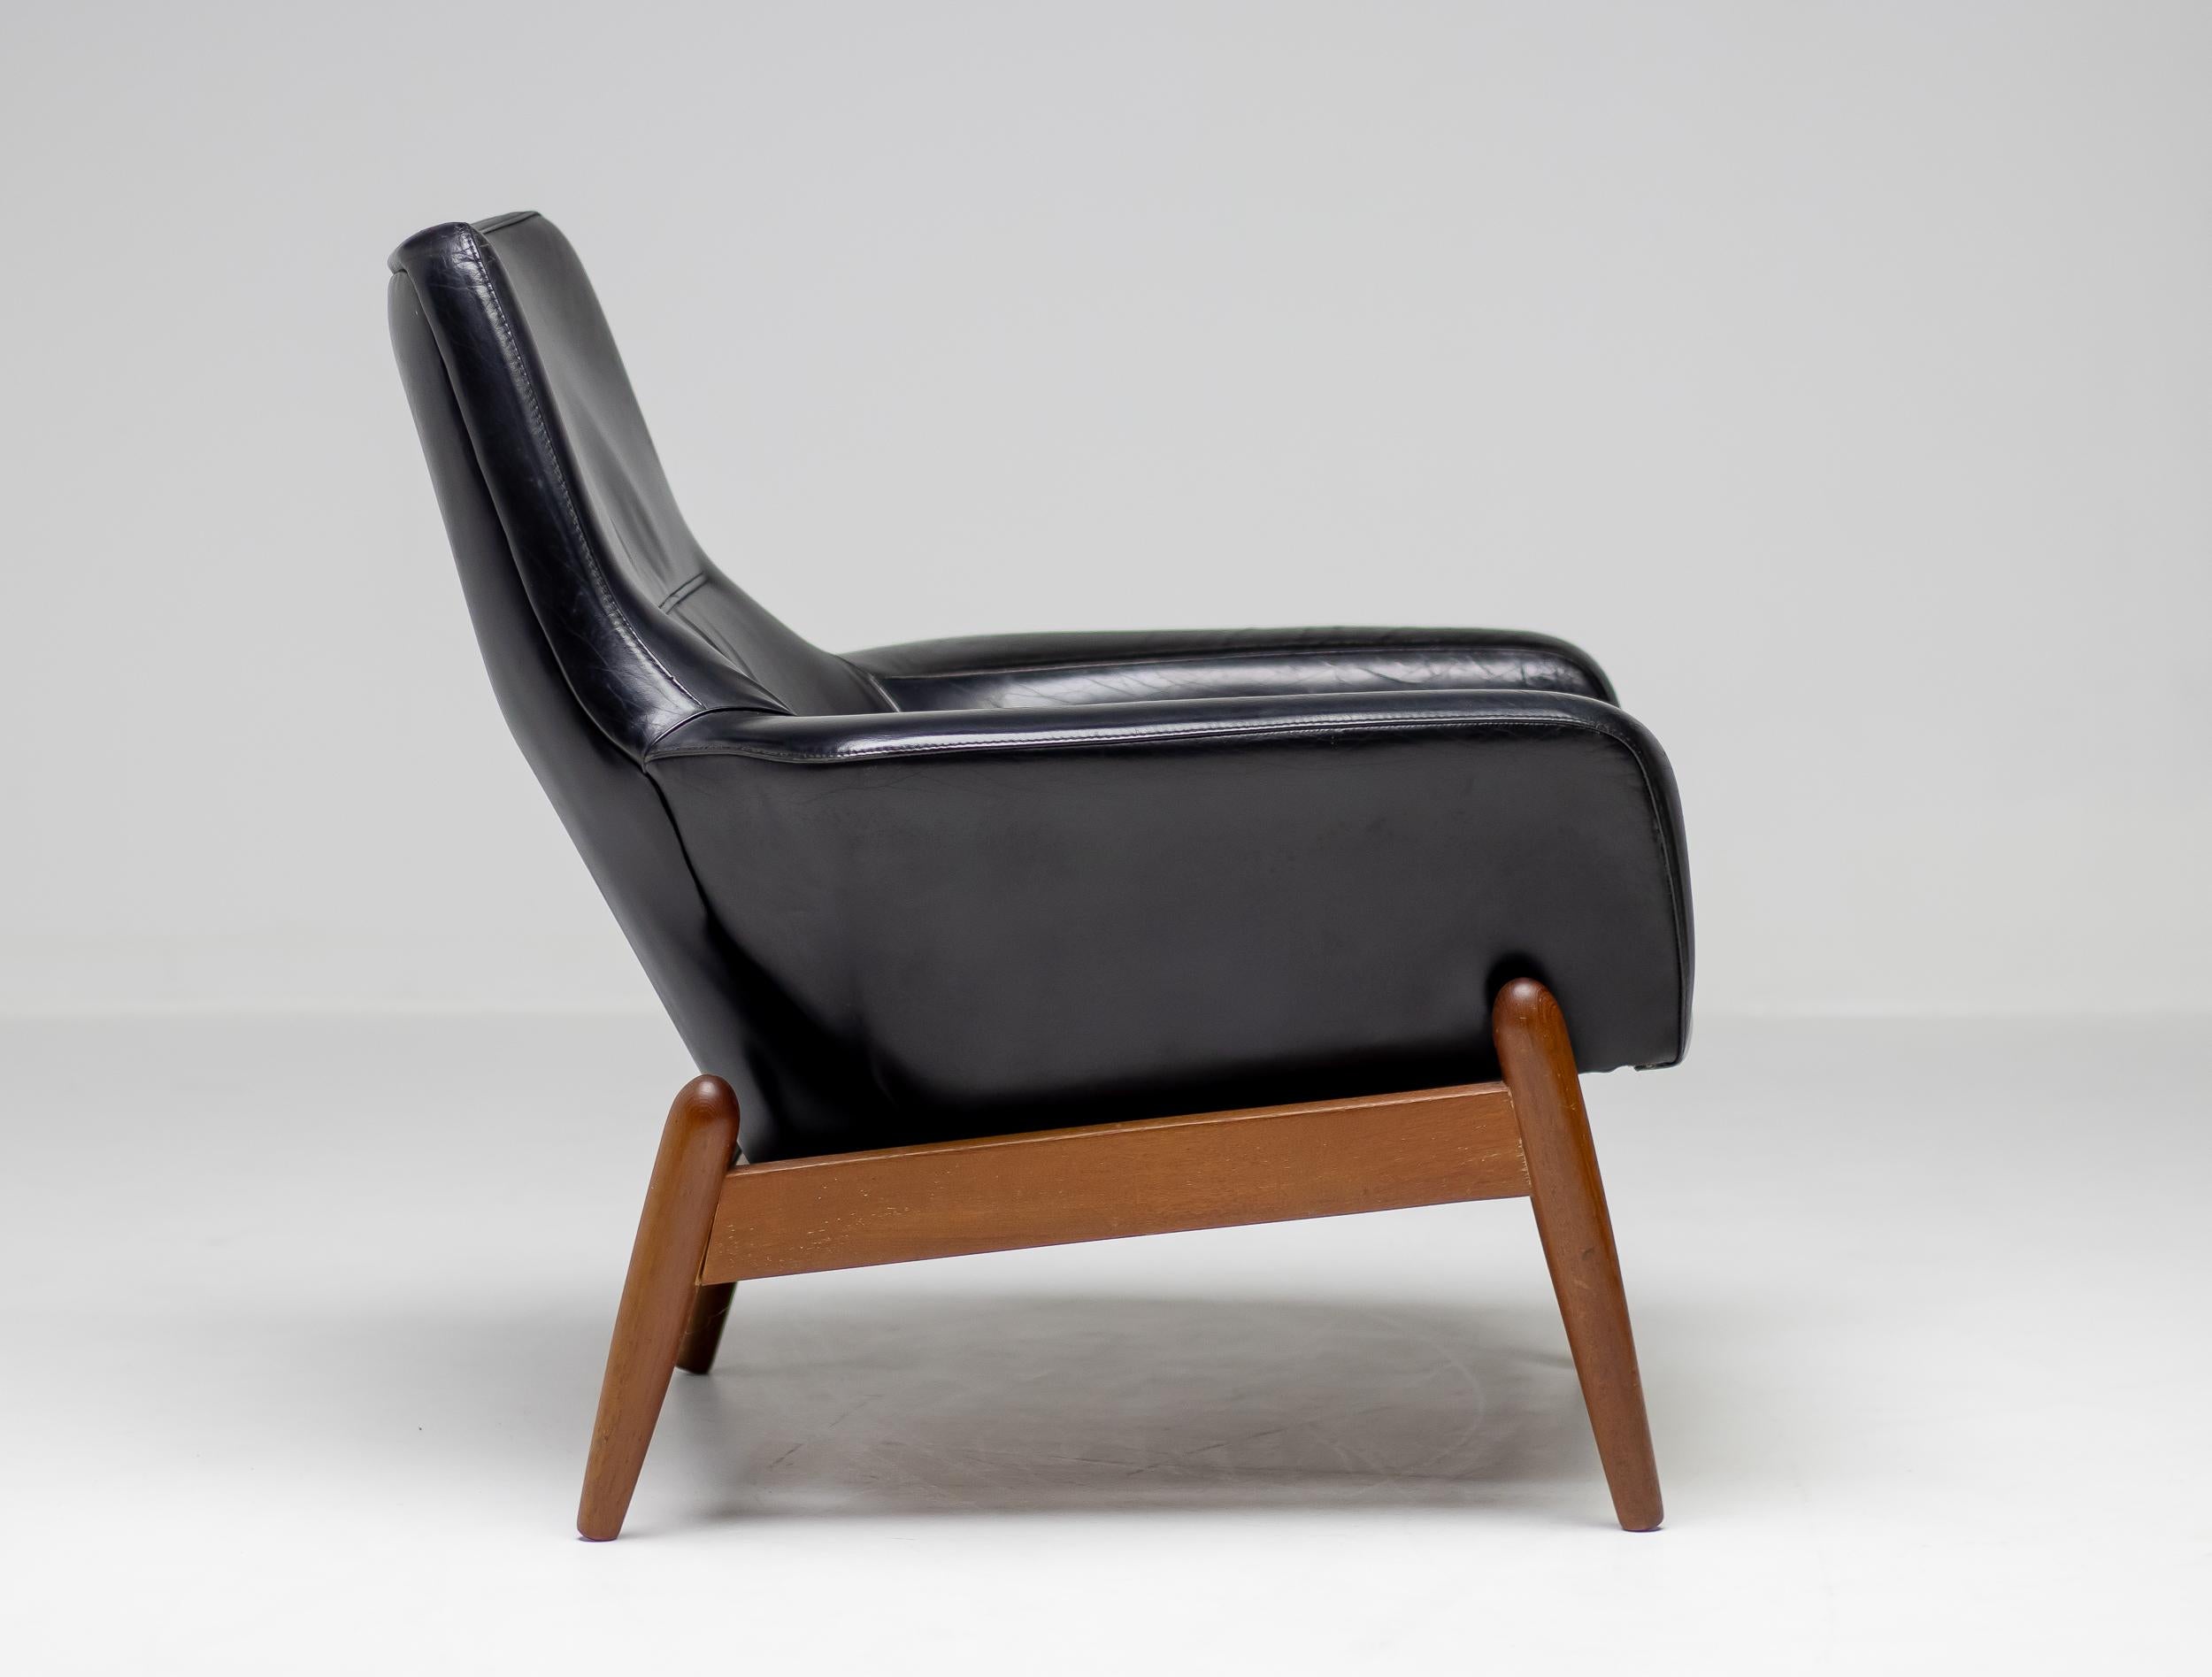 Very comfortable lounge chair designed by Ib Kofod Larsen in teak and black leather.
Marked with Bovenkamp brandmark.

Ib Kofod Larsen (1921-2003) was a Danish furniture designer whose work left an indelible mark on mid-century modern design. Known